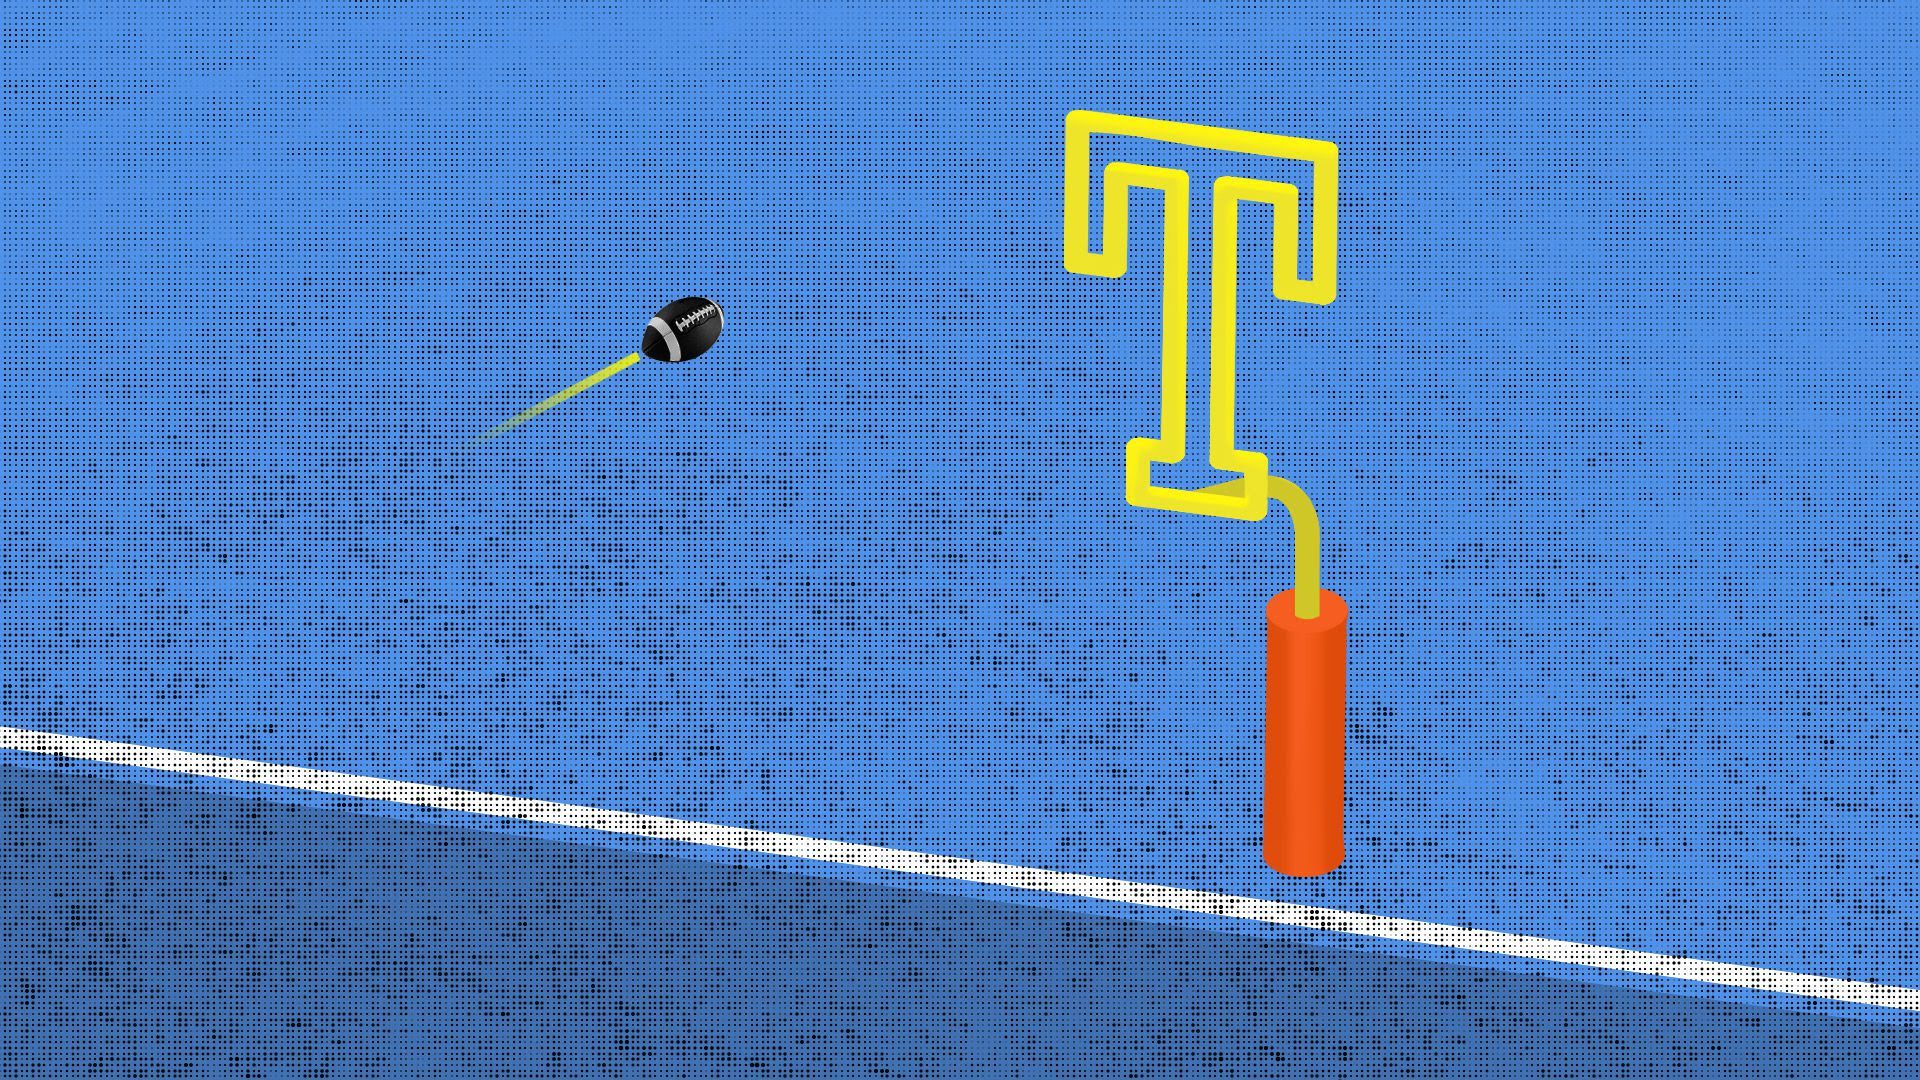 An illustration of a football heading toward a goal post in the shape of a capital T